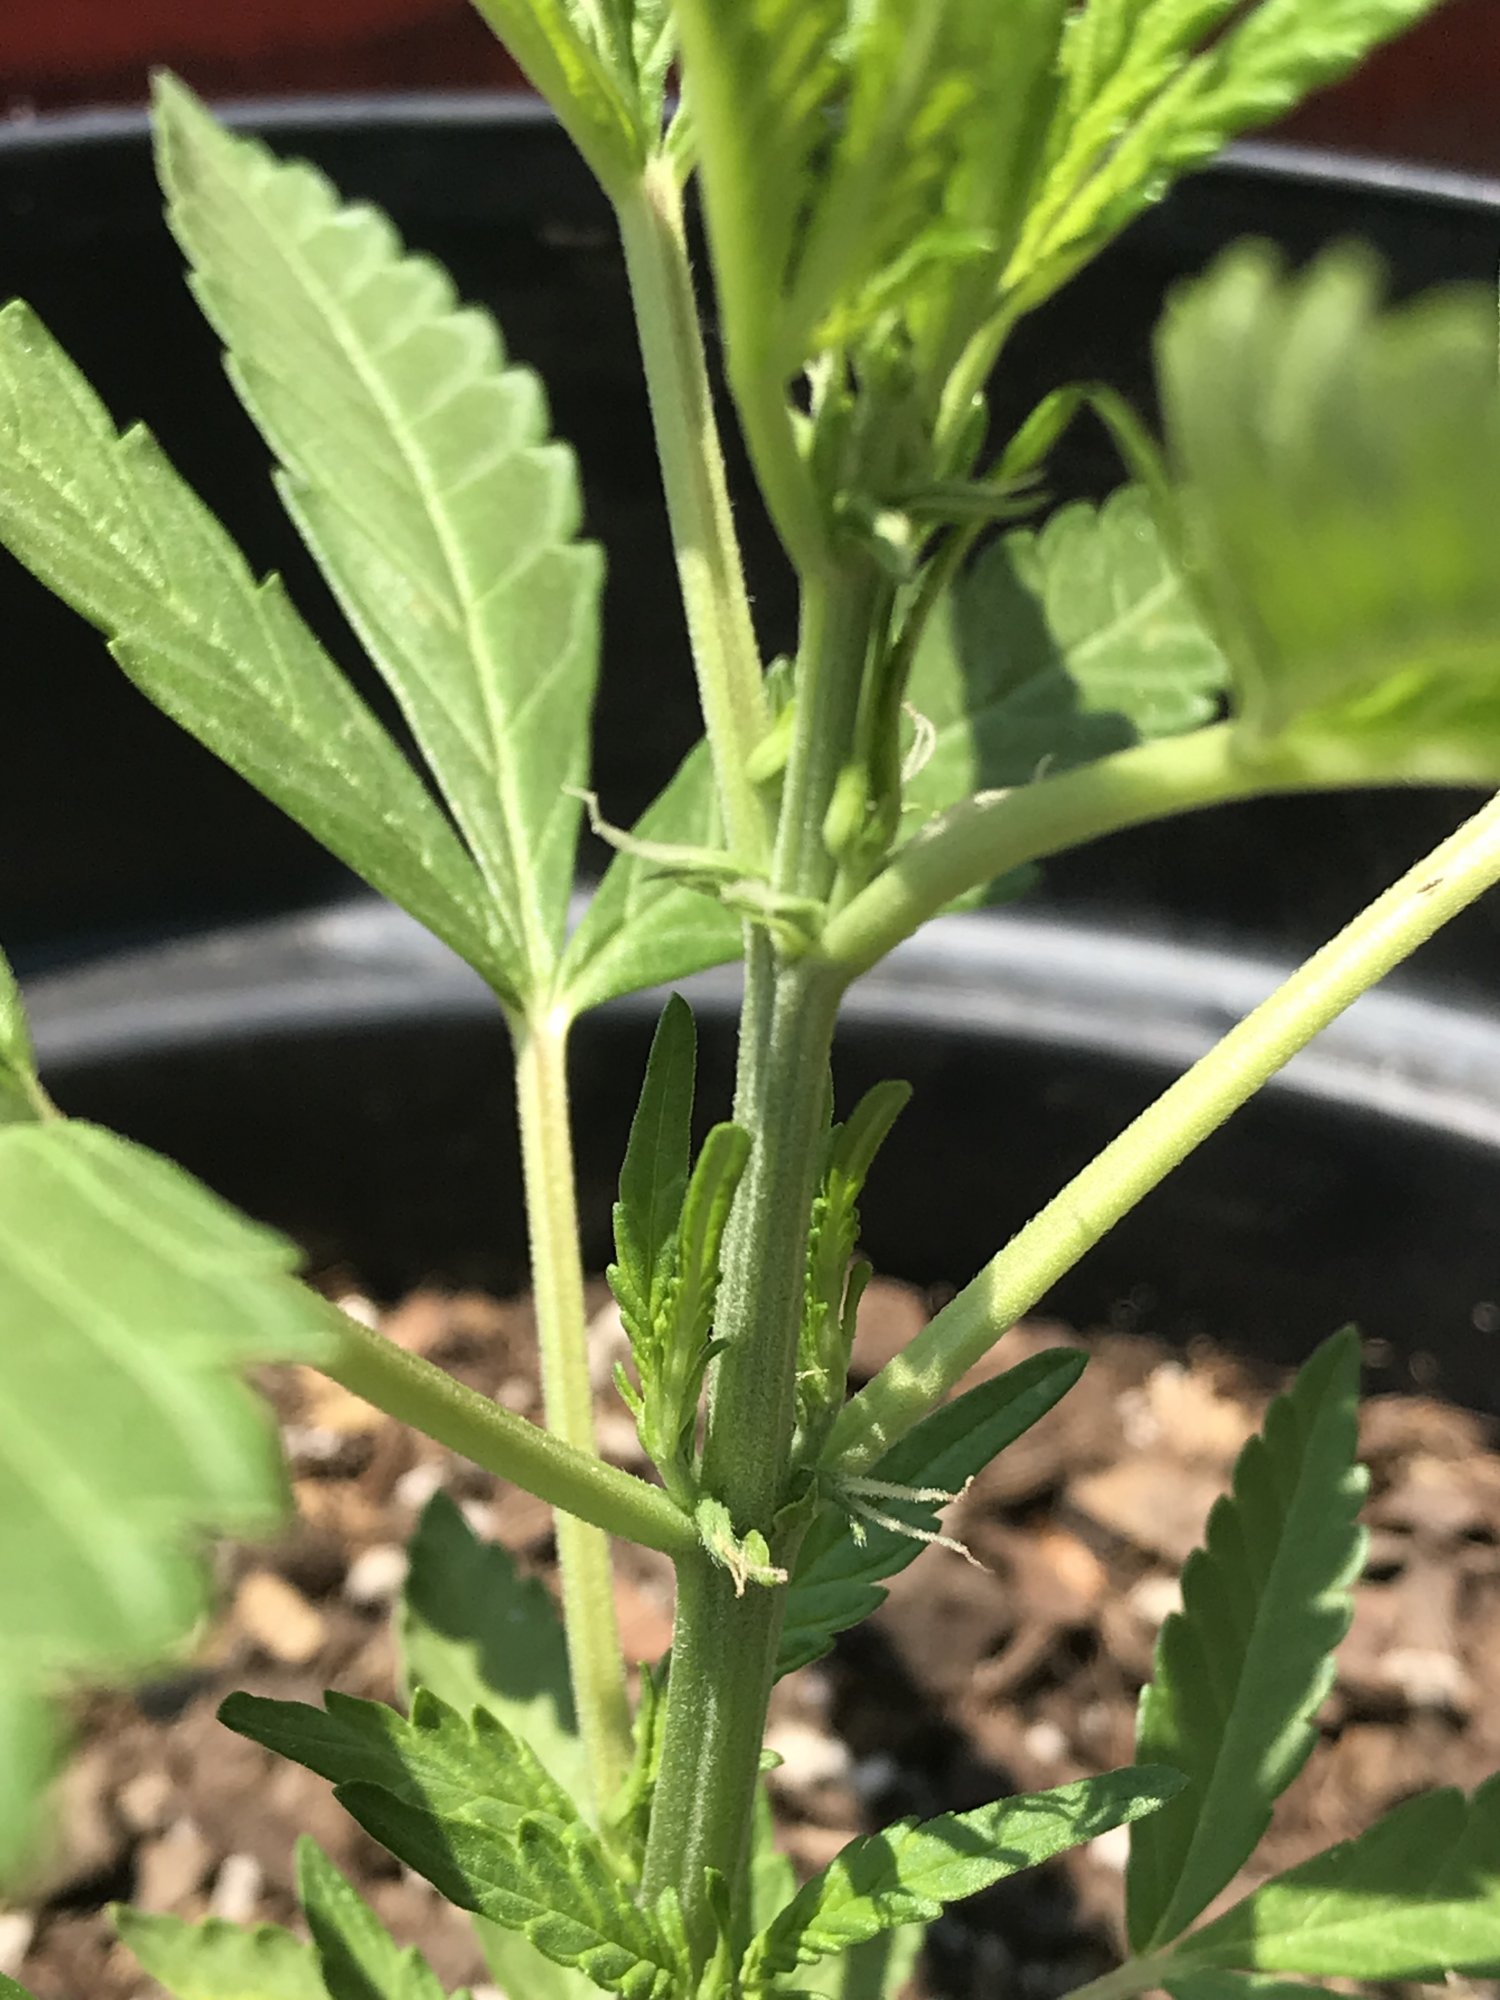 First time grower here outdoor plant preflowering in veg questions about feedingwatering 2